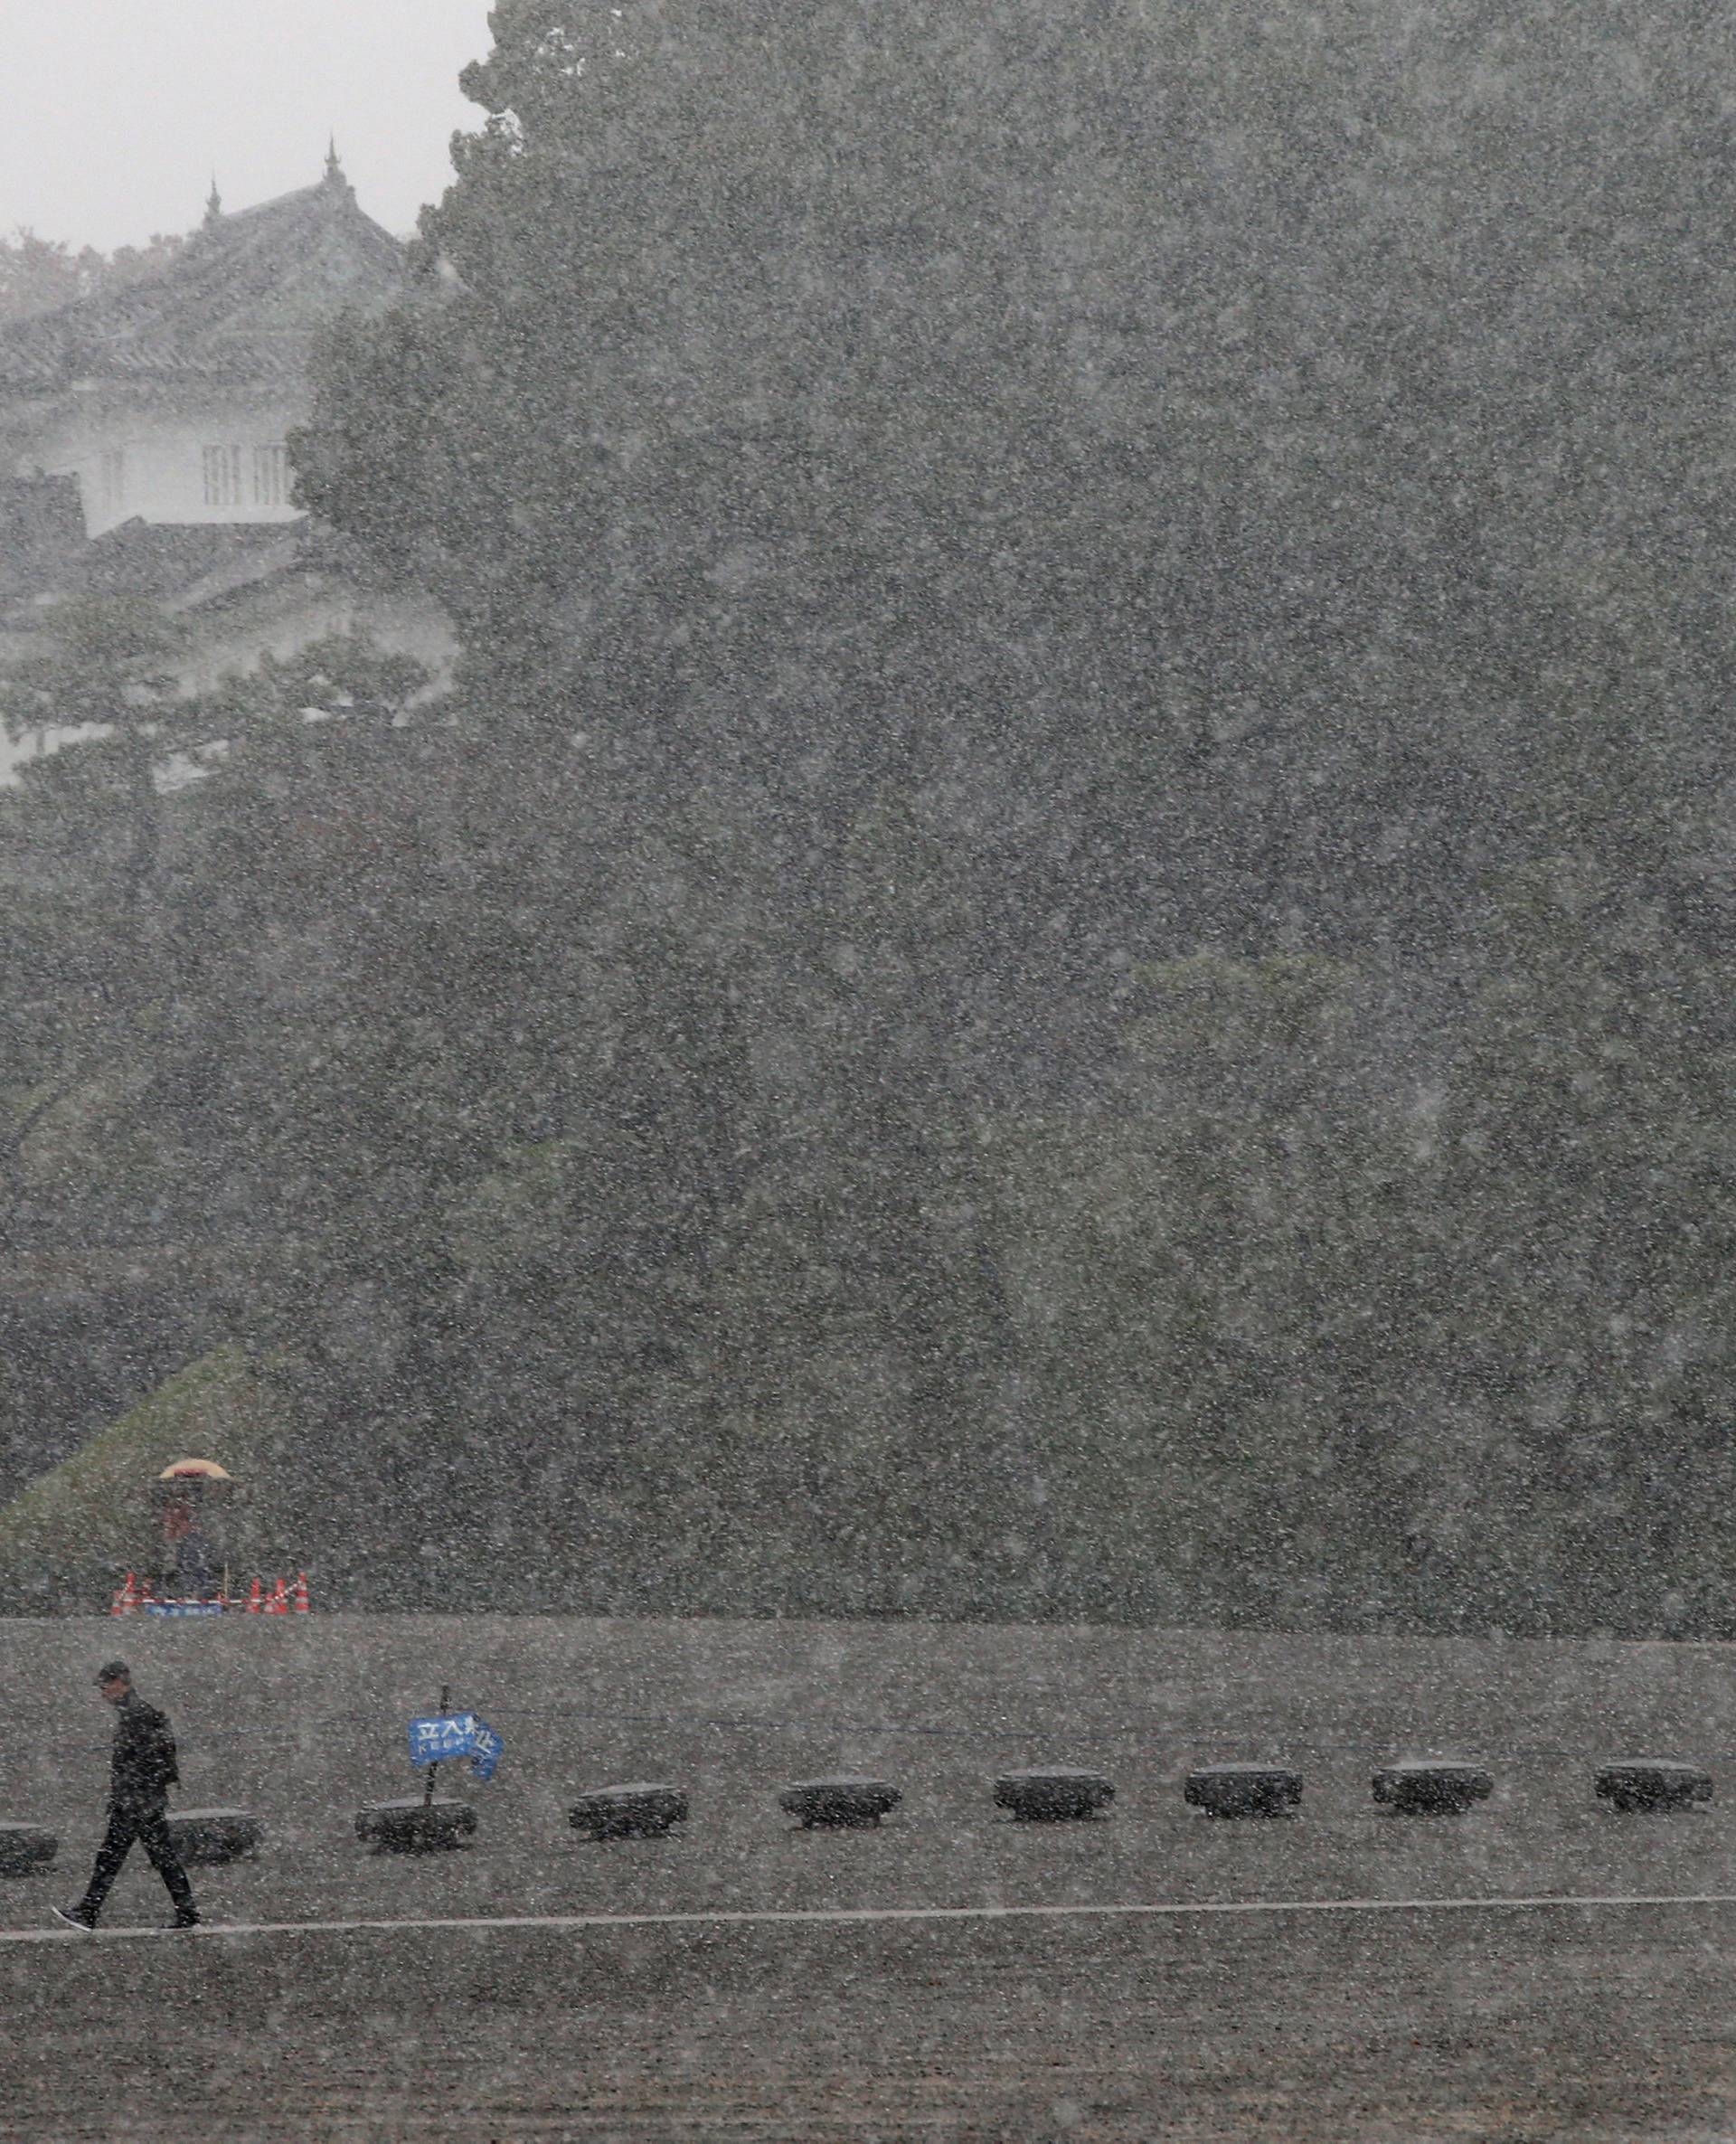 A man walks during the first November snowfall in 54 years in Tokyo, at the Imperial Palace in Tokyo